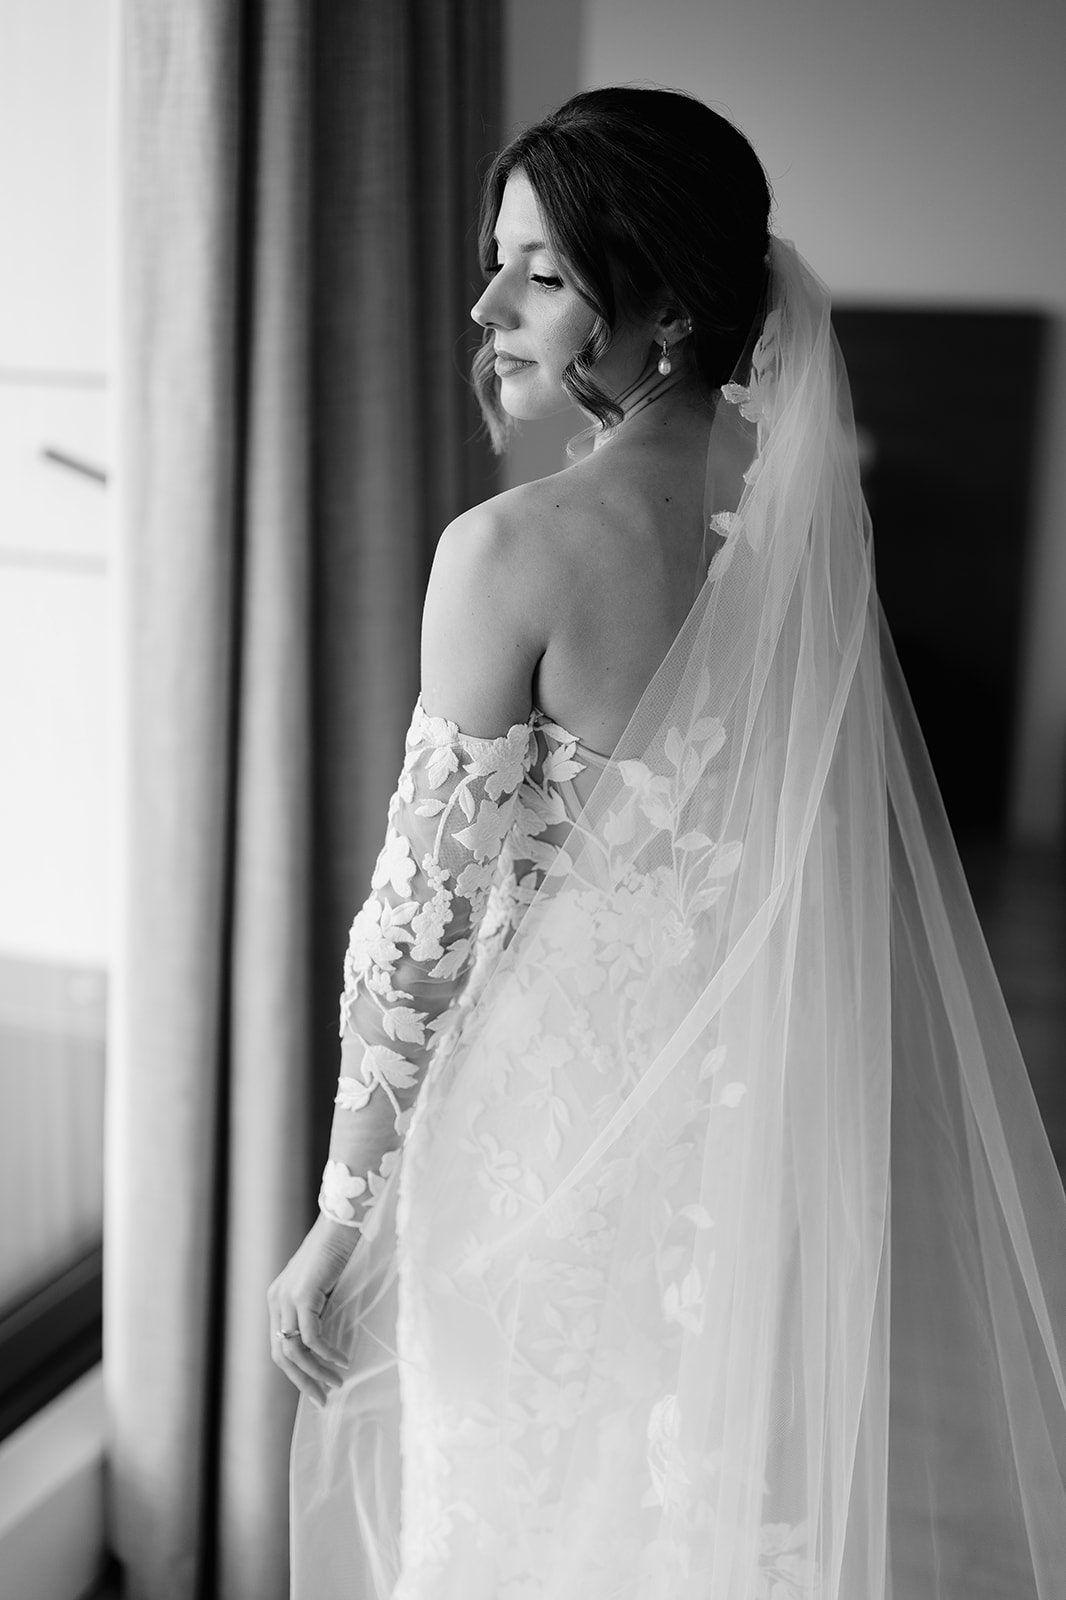 editorial portrait of bride with veil in black and white at hope st hotel